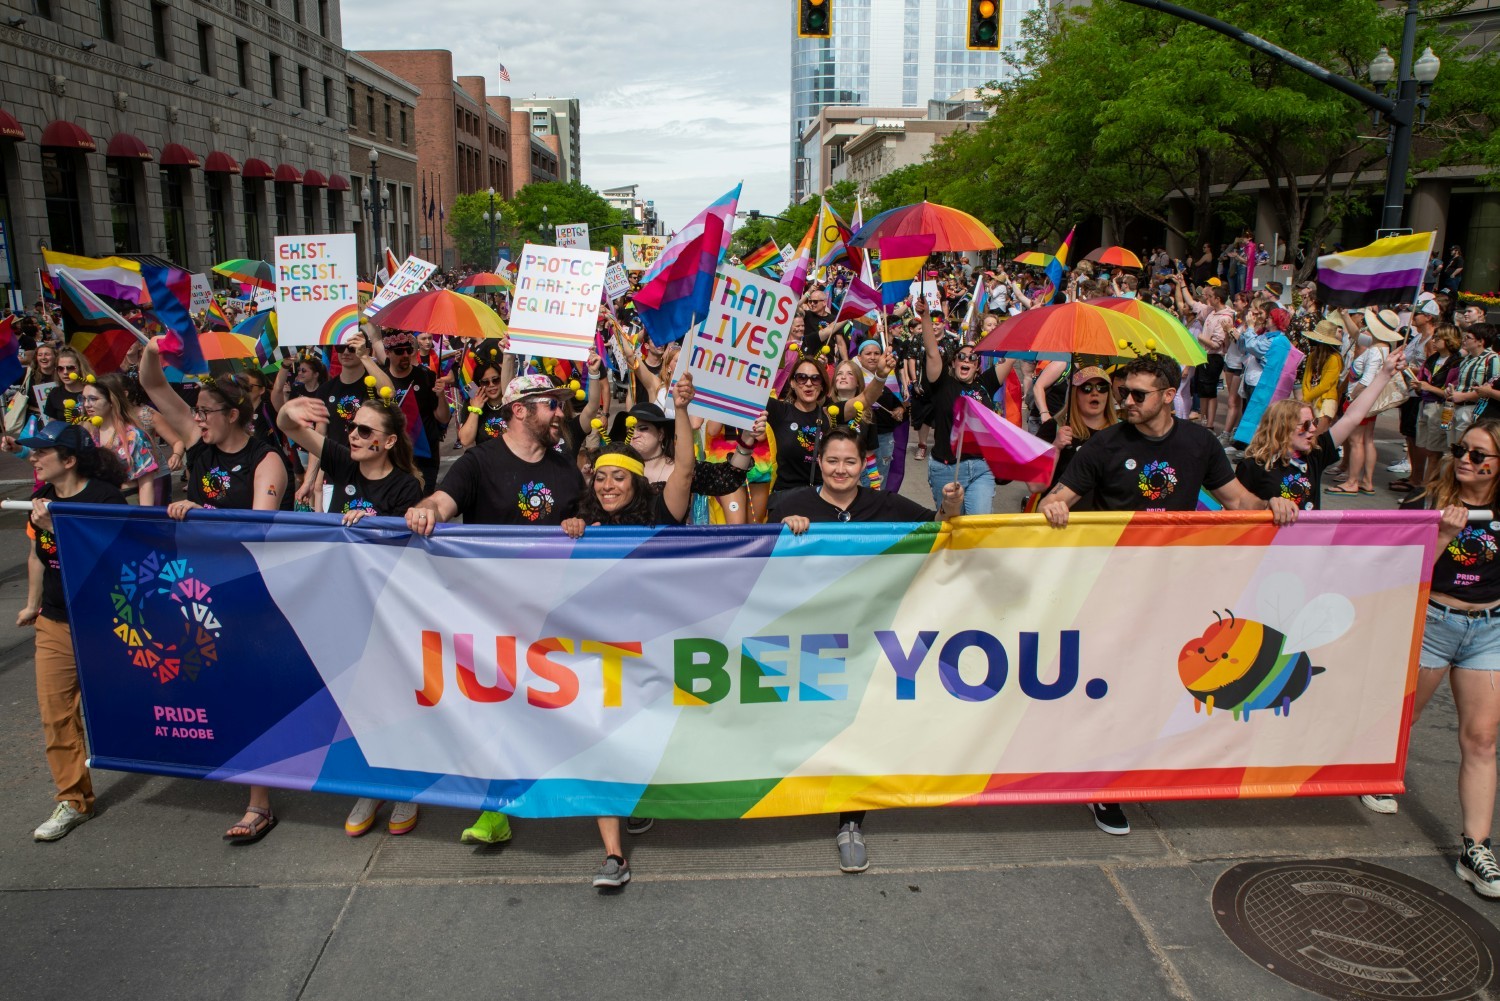 Adobe employees celebrating Pride and creating a community for all